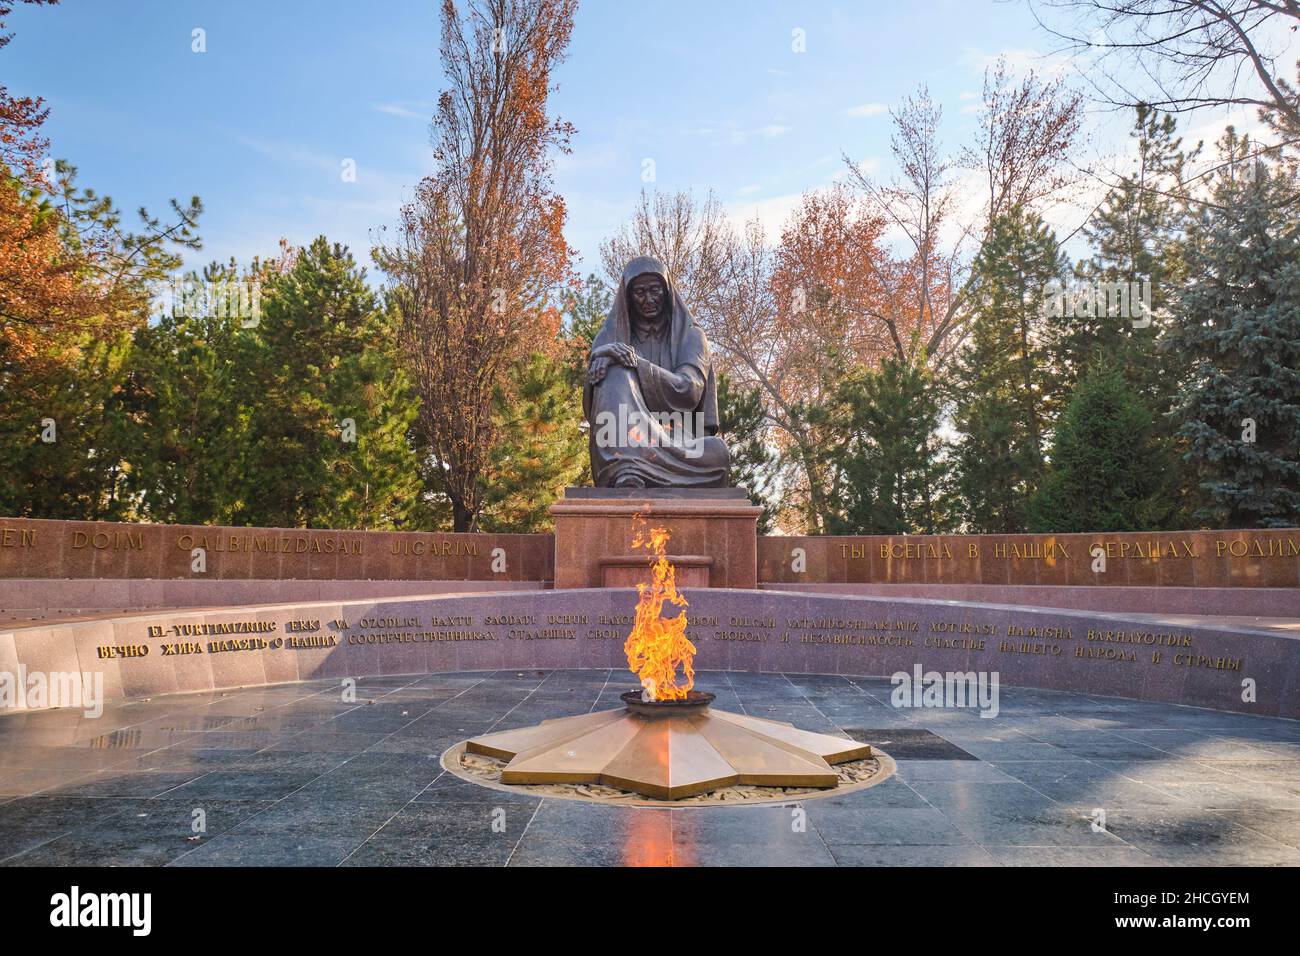 The eternal fire flam and wailing mother statue. At Memorial Square in Tashkent, Uzbekistan. Stock Photo